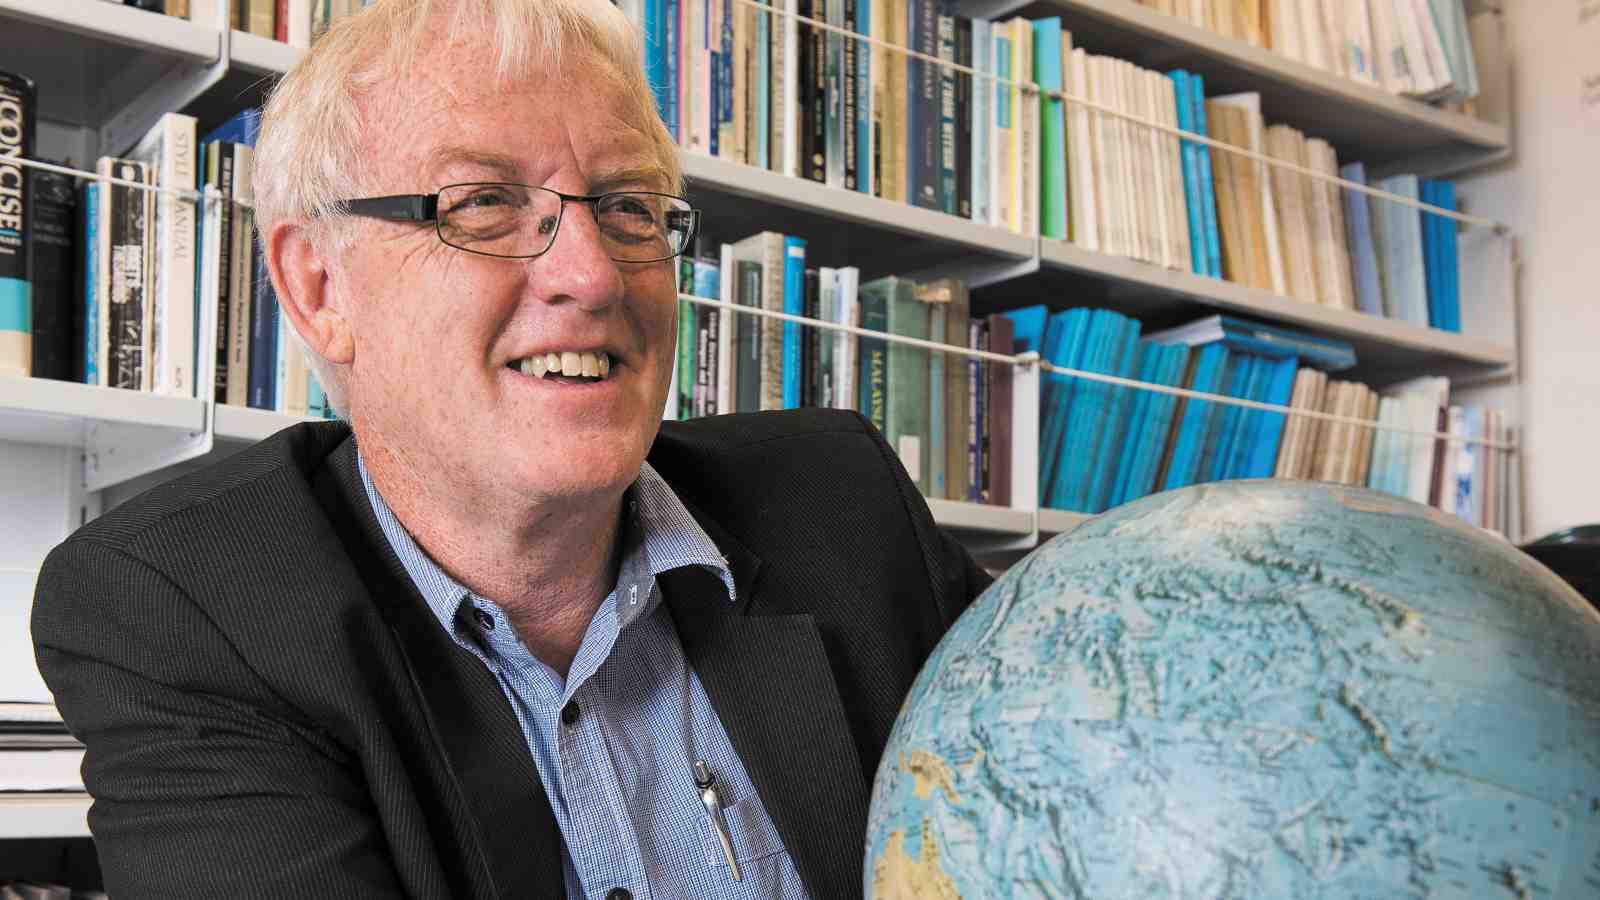 Professor John Overton from the School of Geography, Enviroment and Earth Sciences